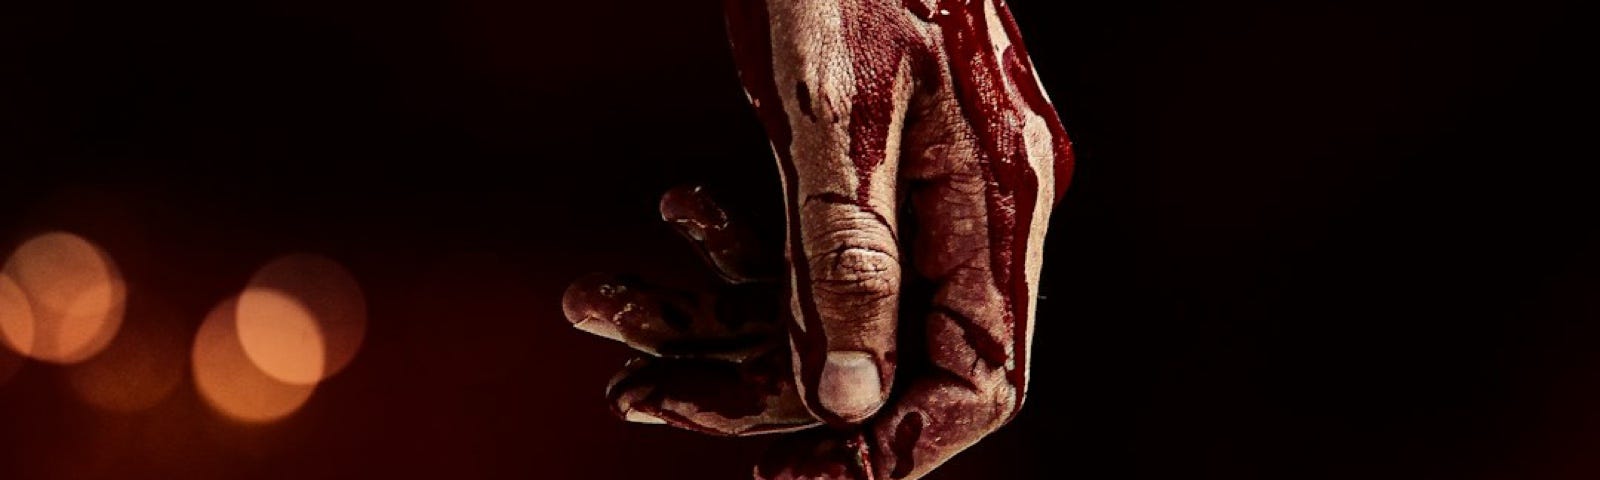 Against a black background, a bloodied hand reaches down, holding what looks like a heart wrapped in wire.